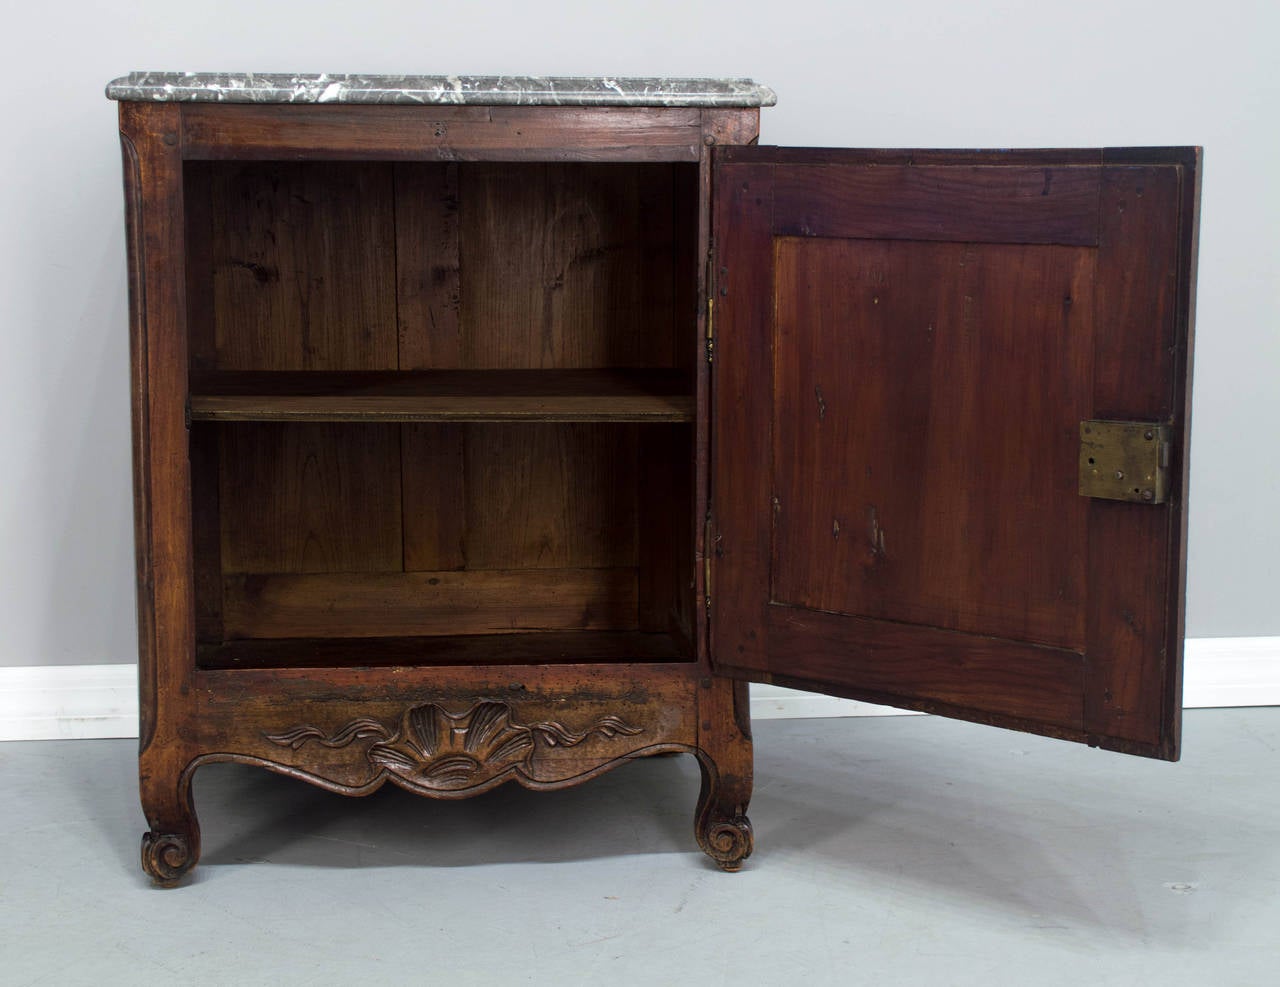 A 19th c. French Louis XV Style Confiturier or single door cabinet with a replaced marble top, solid cherry wood with brass hinges and steel escutcheon, a key and a working lock. A nice size cabinet having a marble top added at a later date. The top